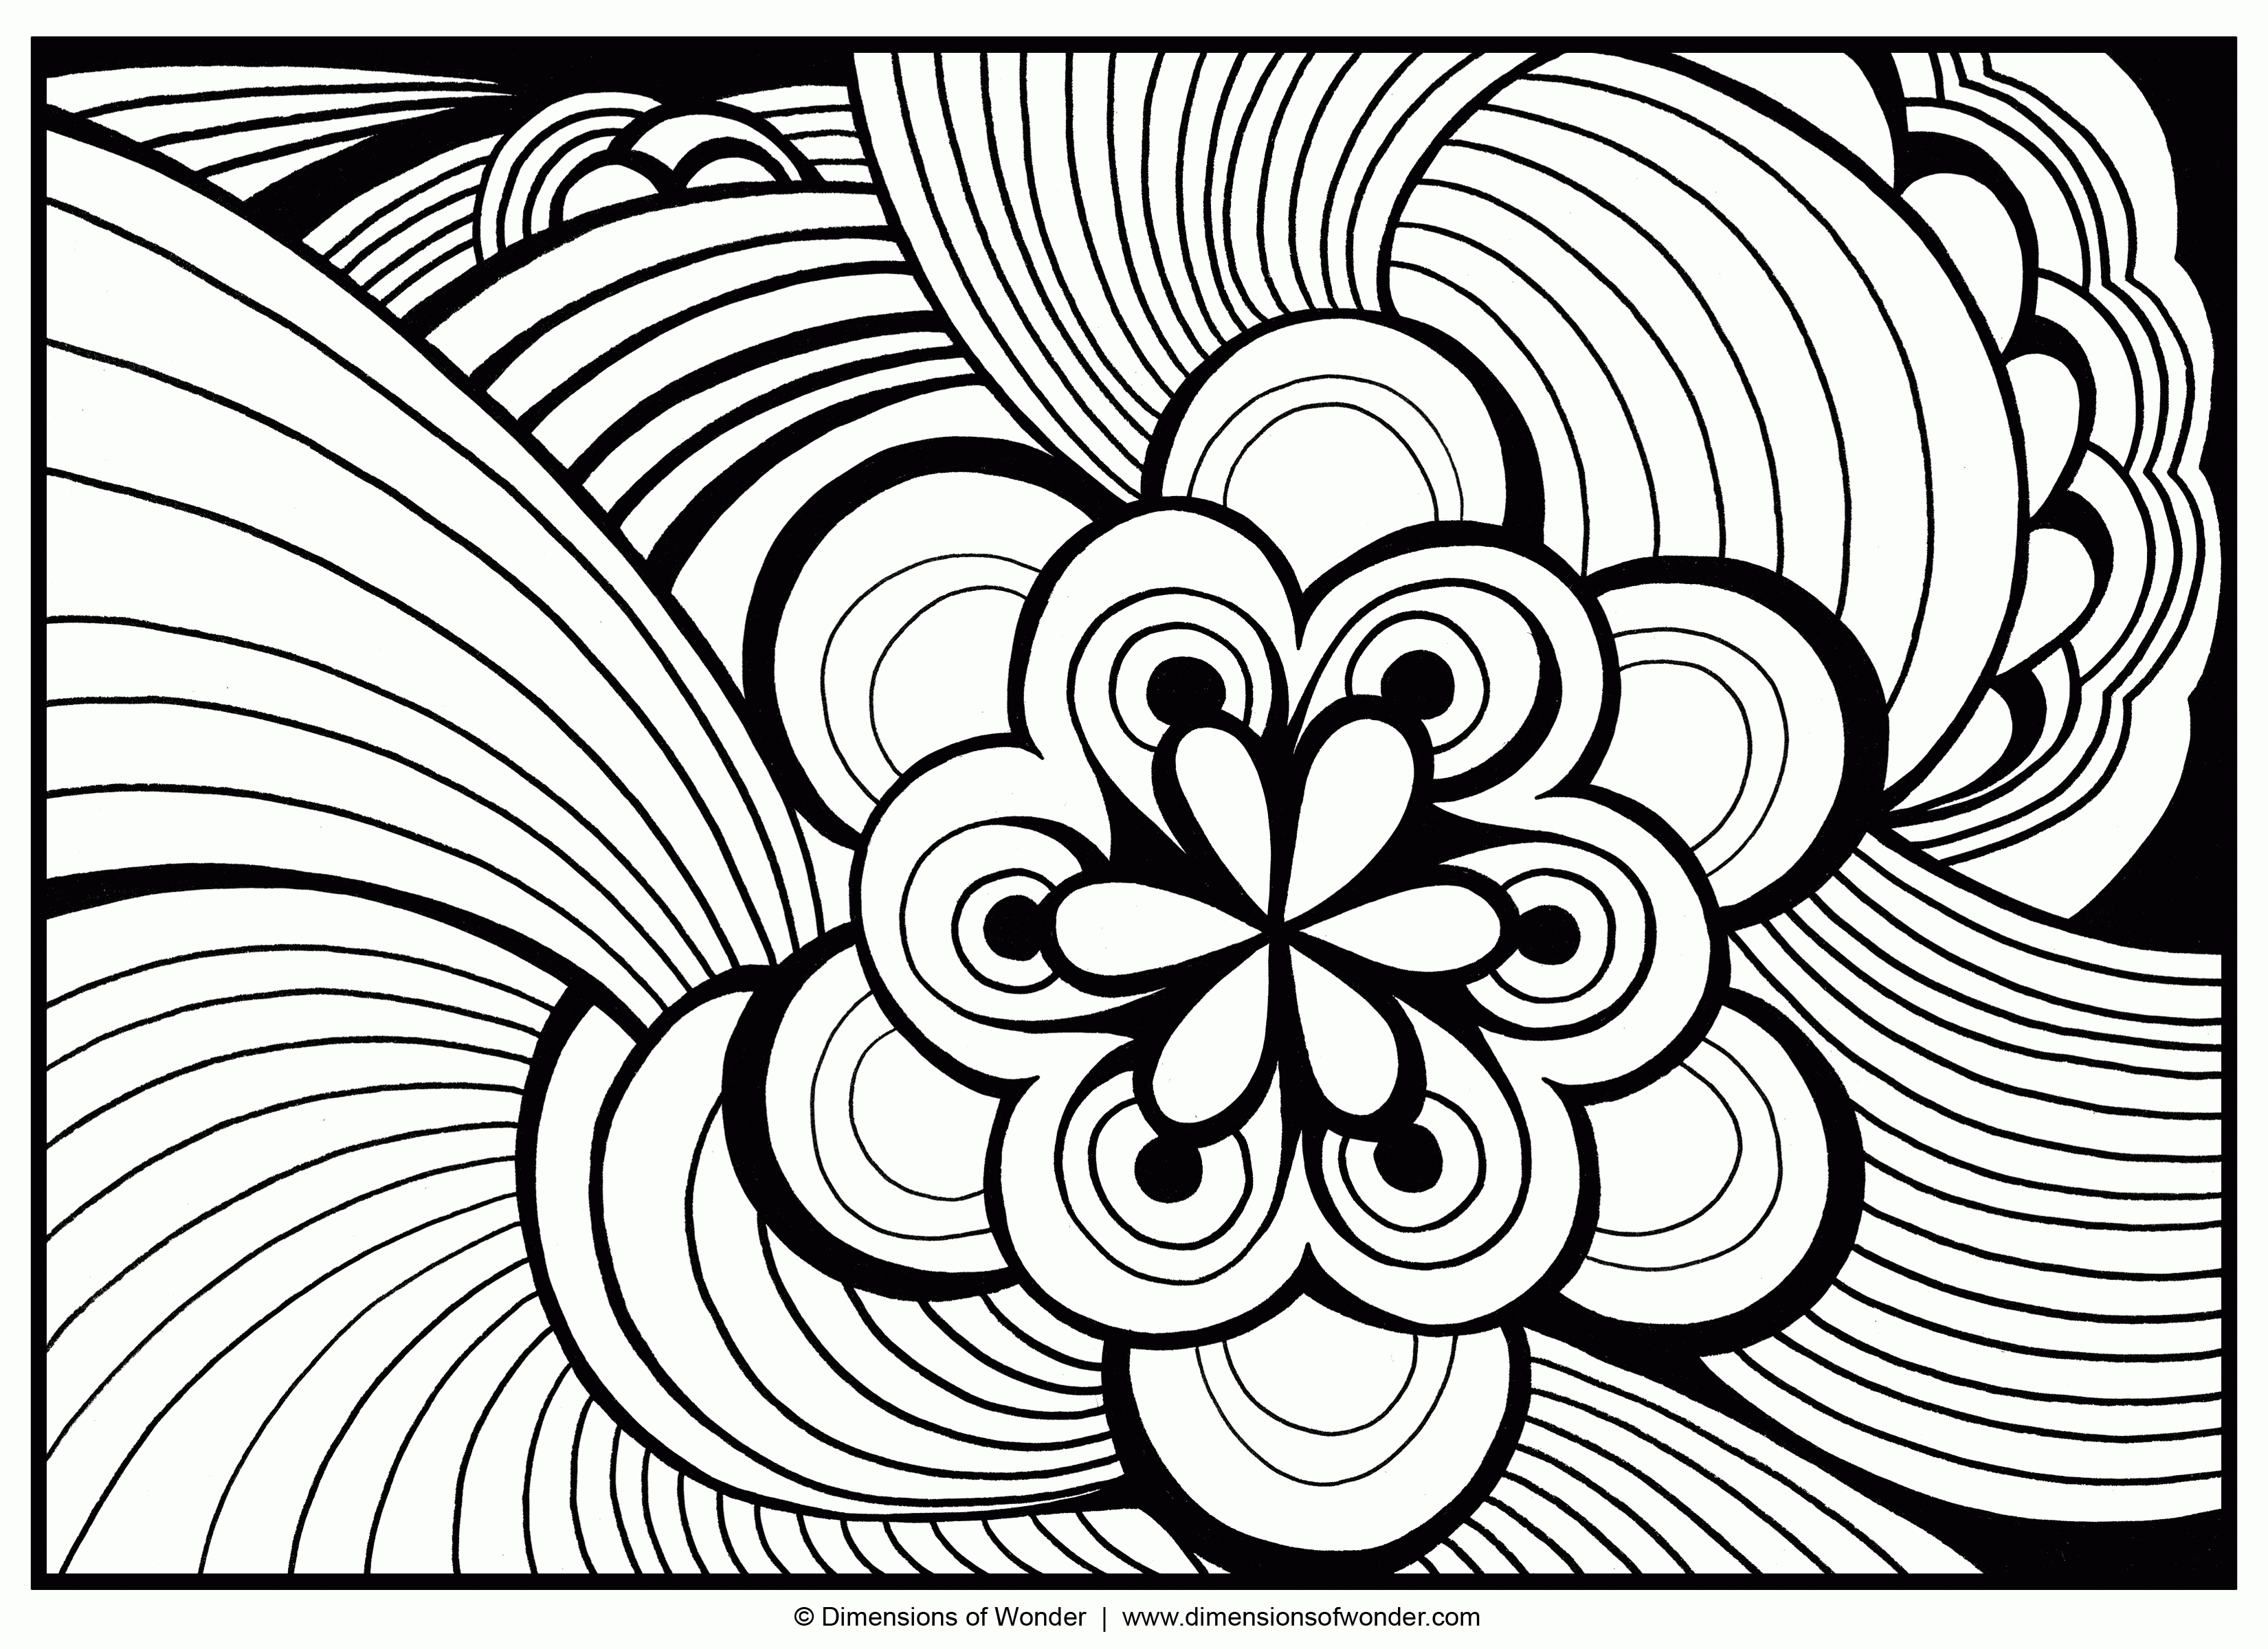 Abstract Coloring Page Mushroom - Coloring Pages For All Ages